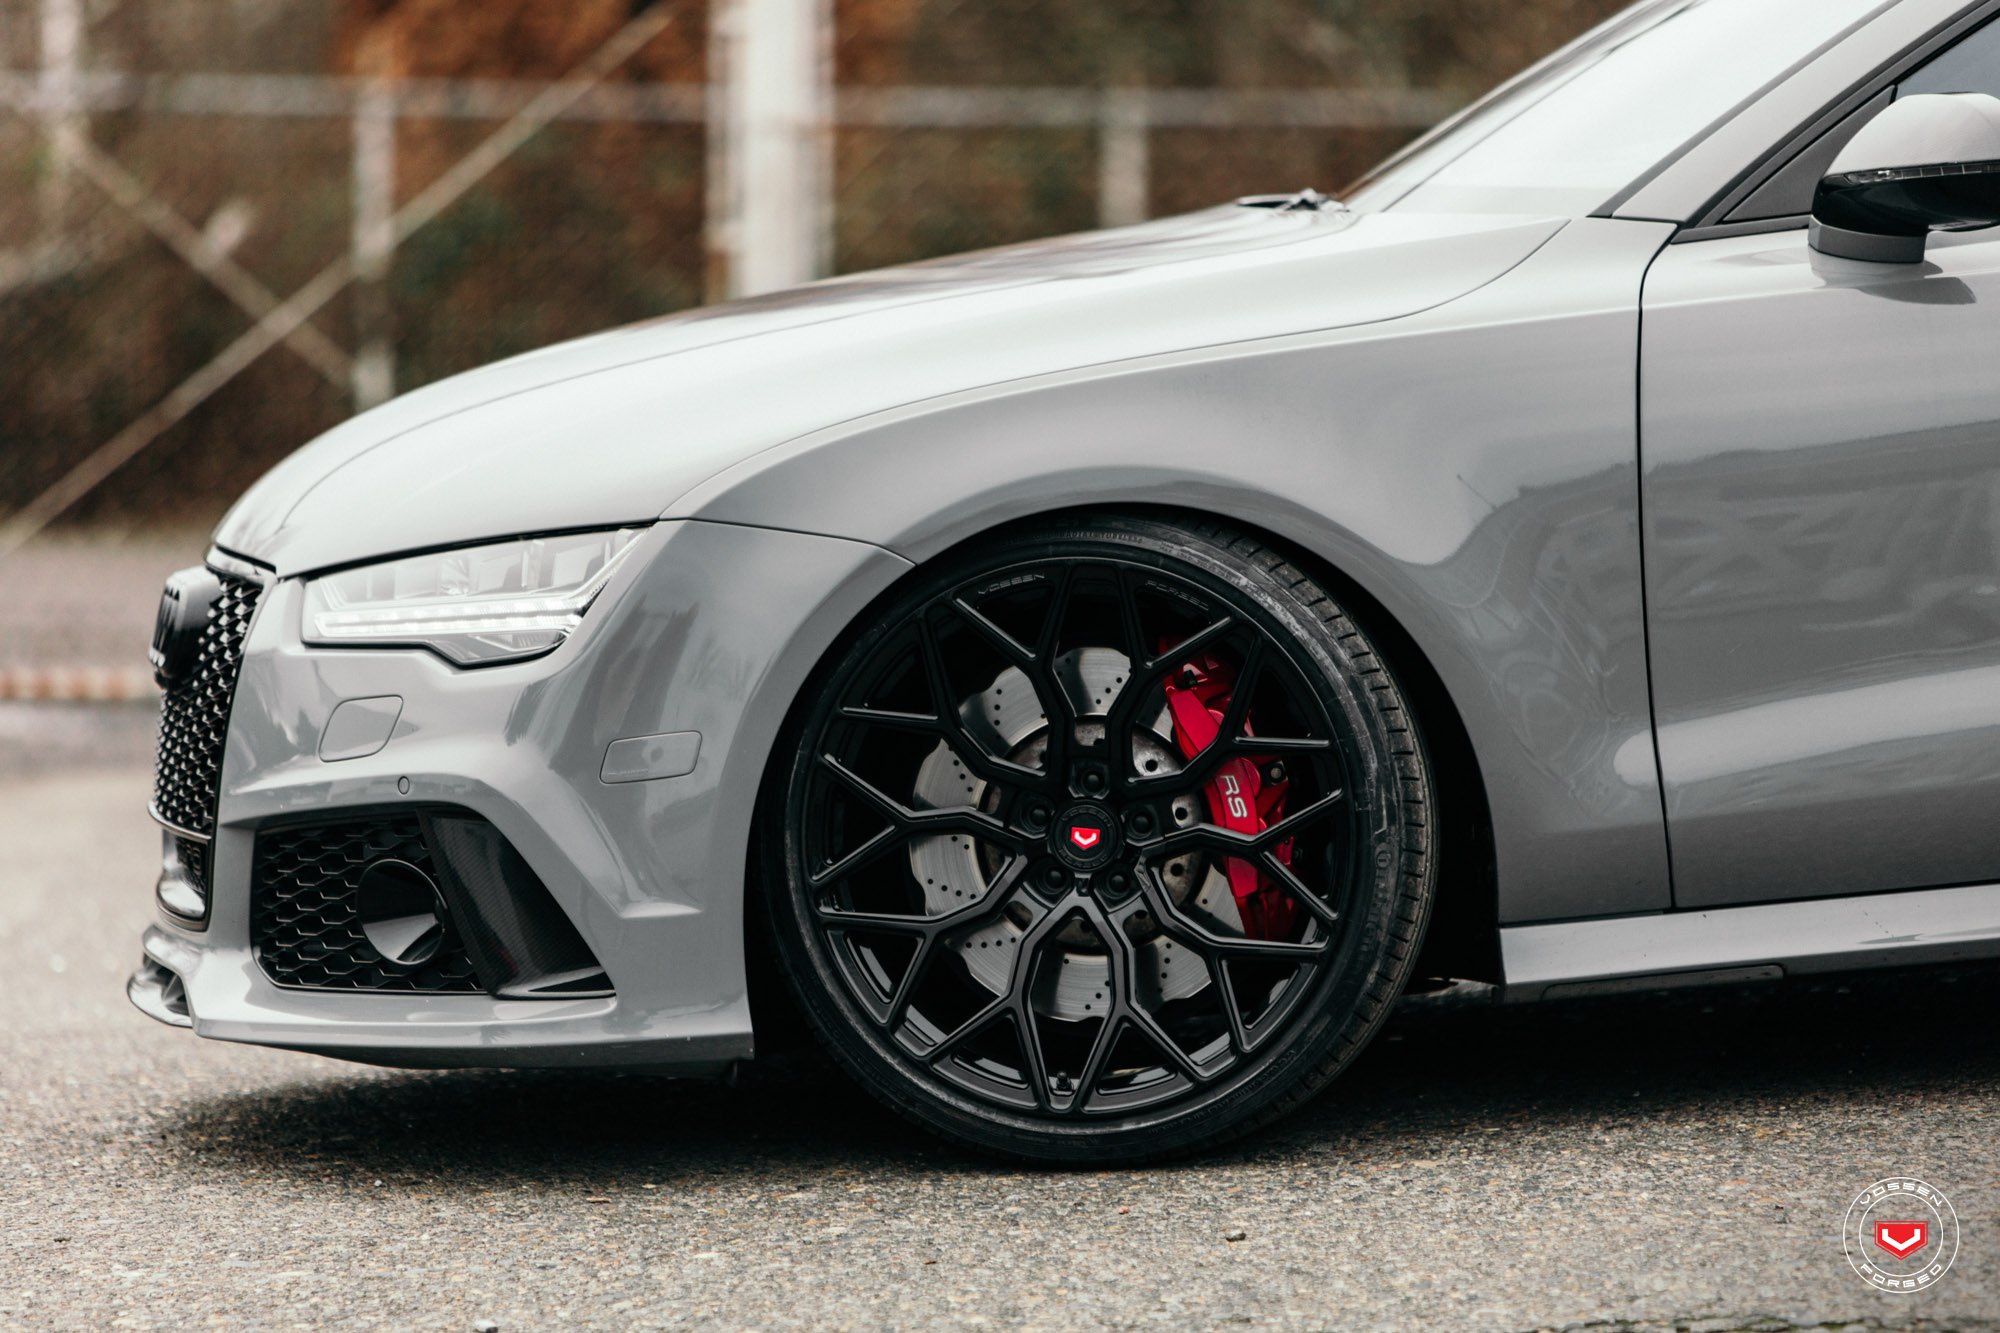 Black Forged Vossen Rims on Gray Audi A7 - Photo by Vossen